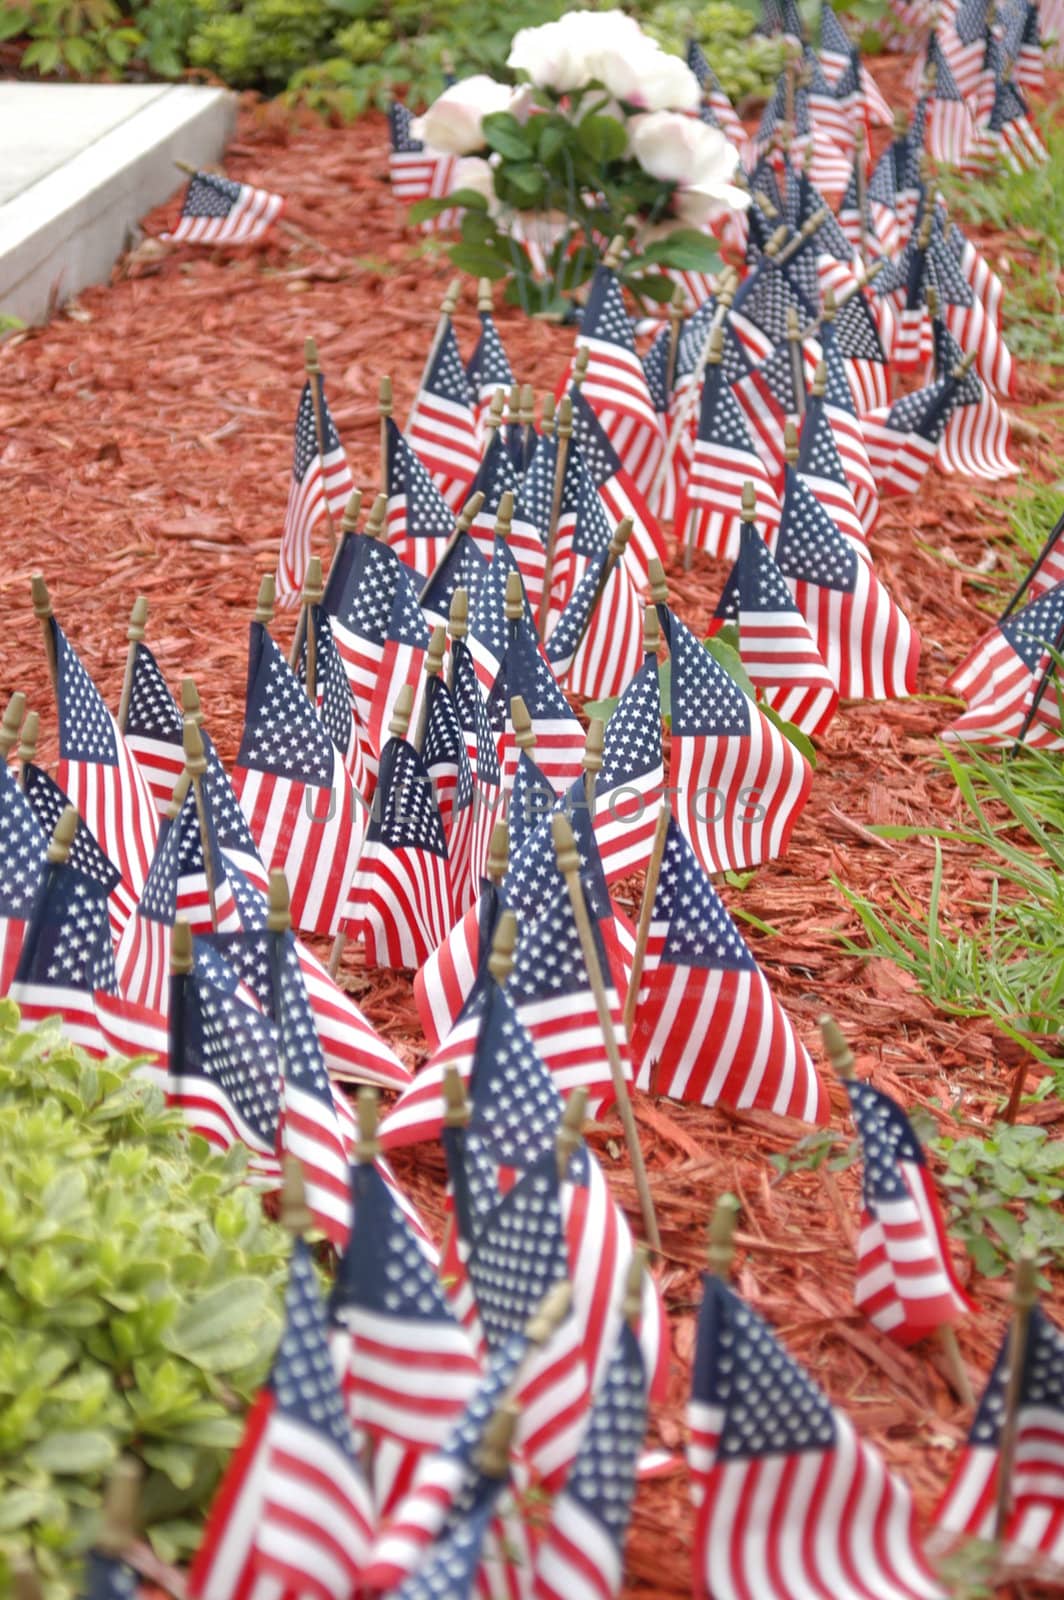 Small american flags in the ground during the fourth of July